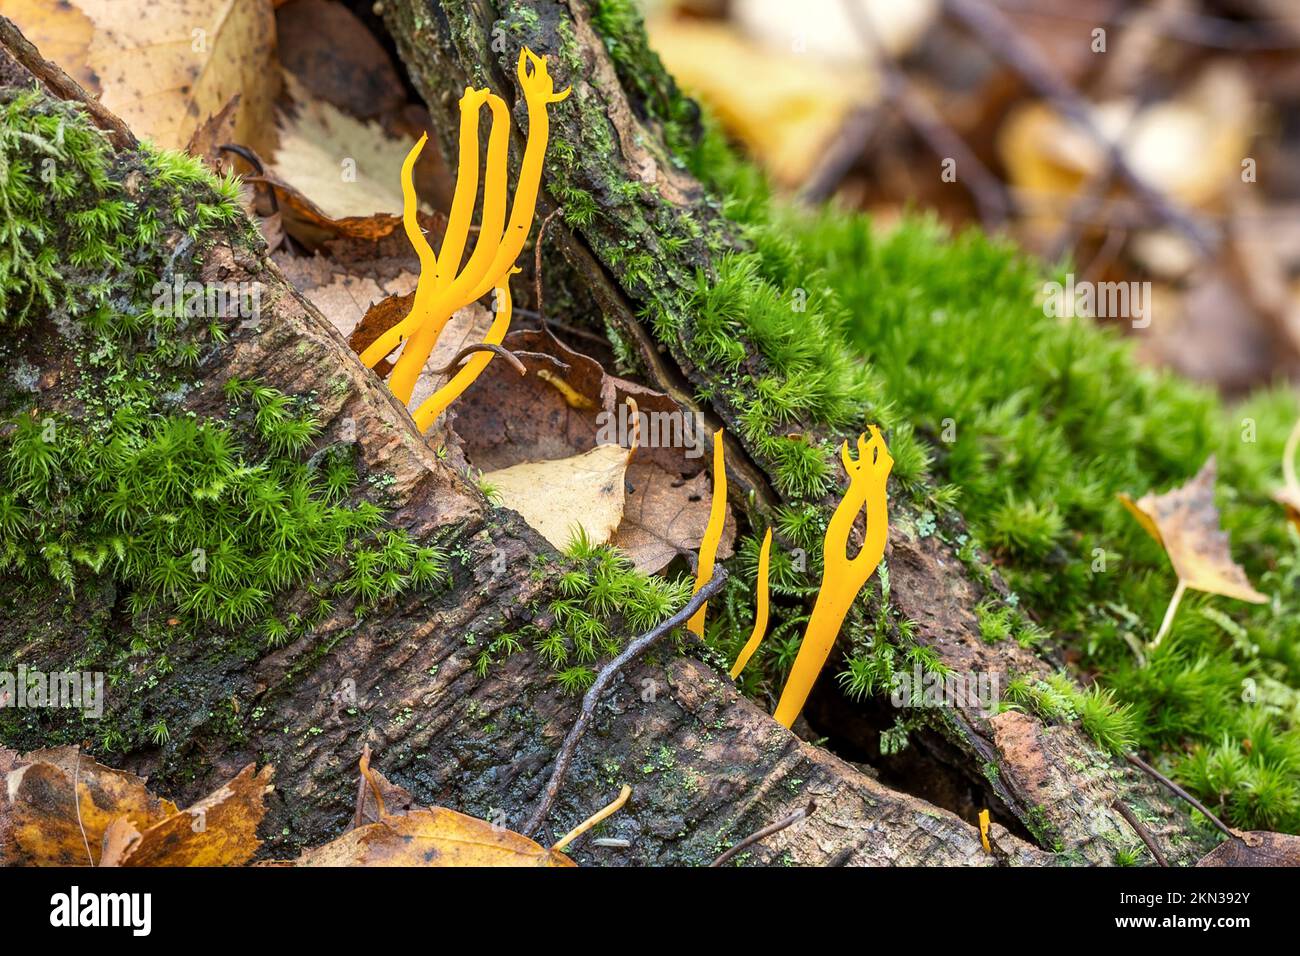 Golden Spindles, Clavulinopsis fusiformis, New Forest, Hampshire, UK. Inedible Stock Photo